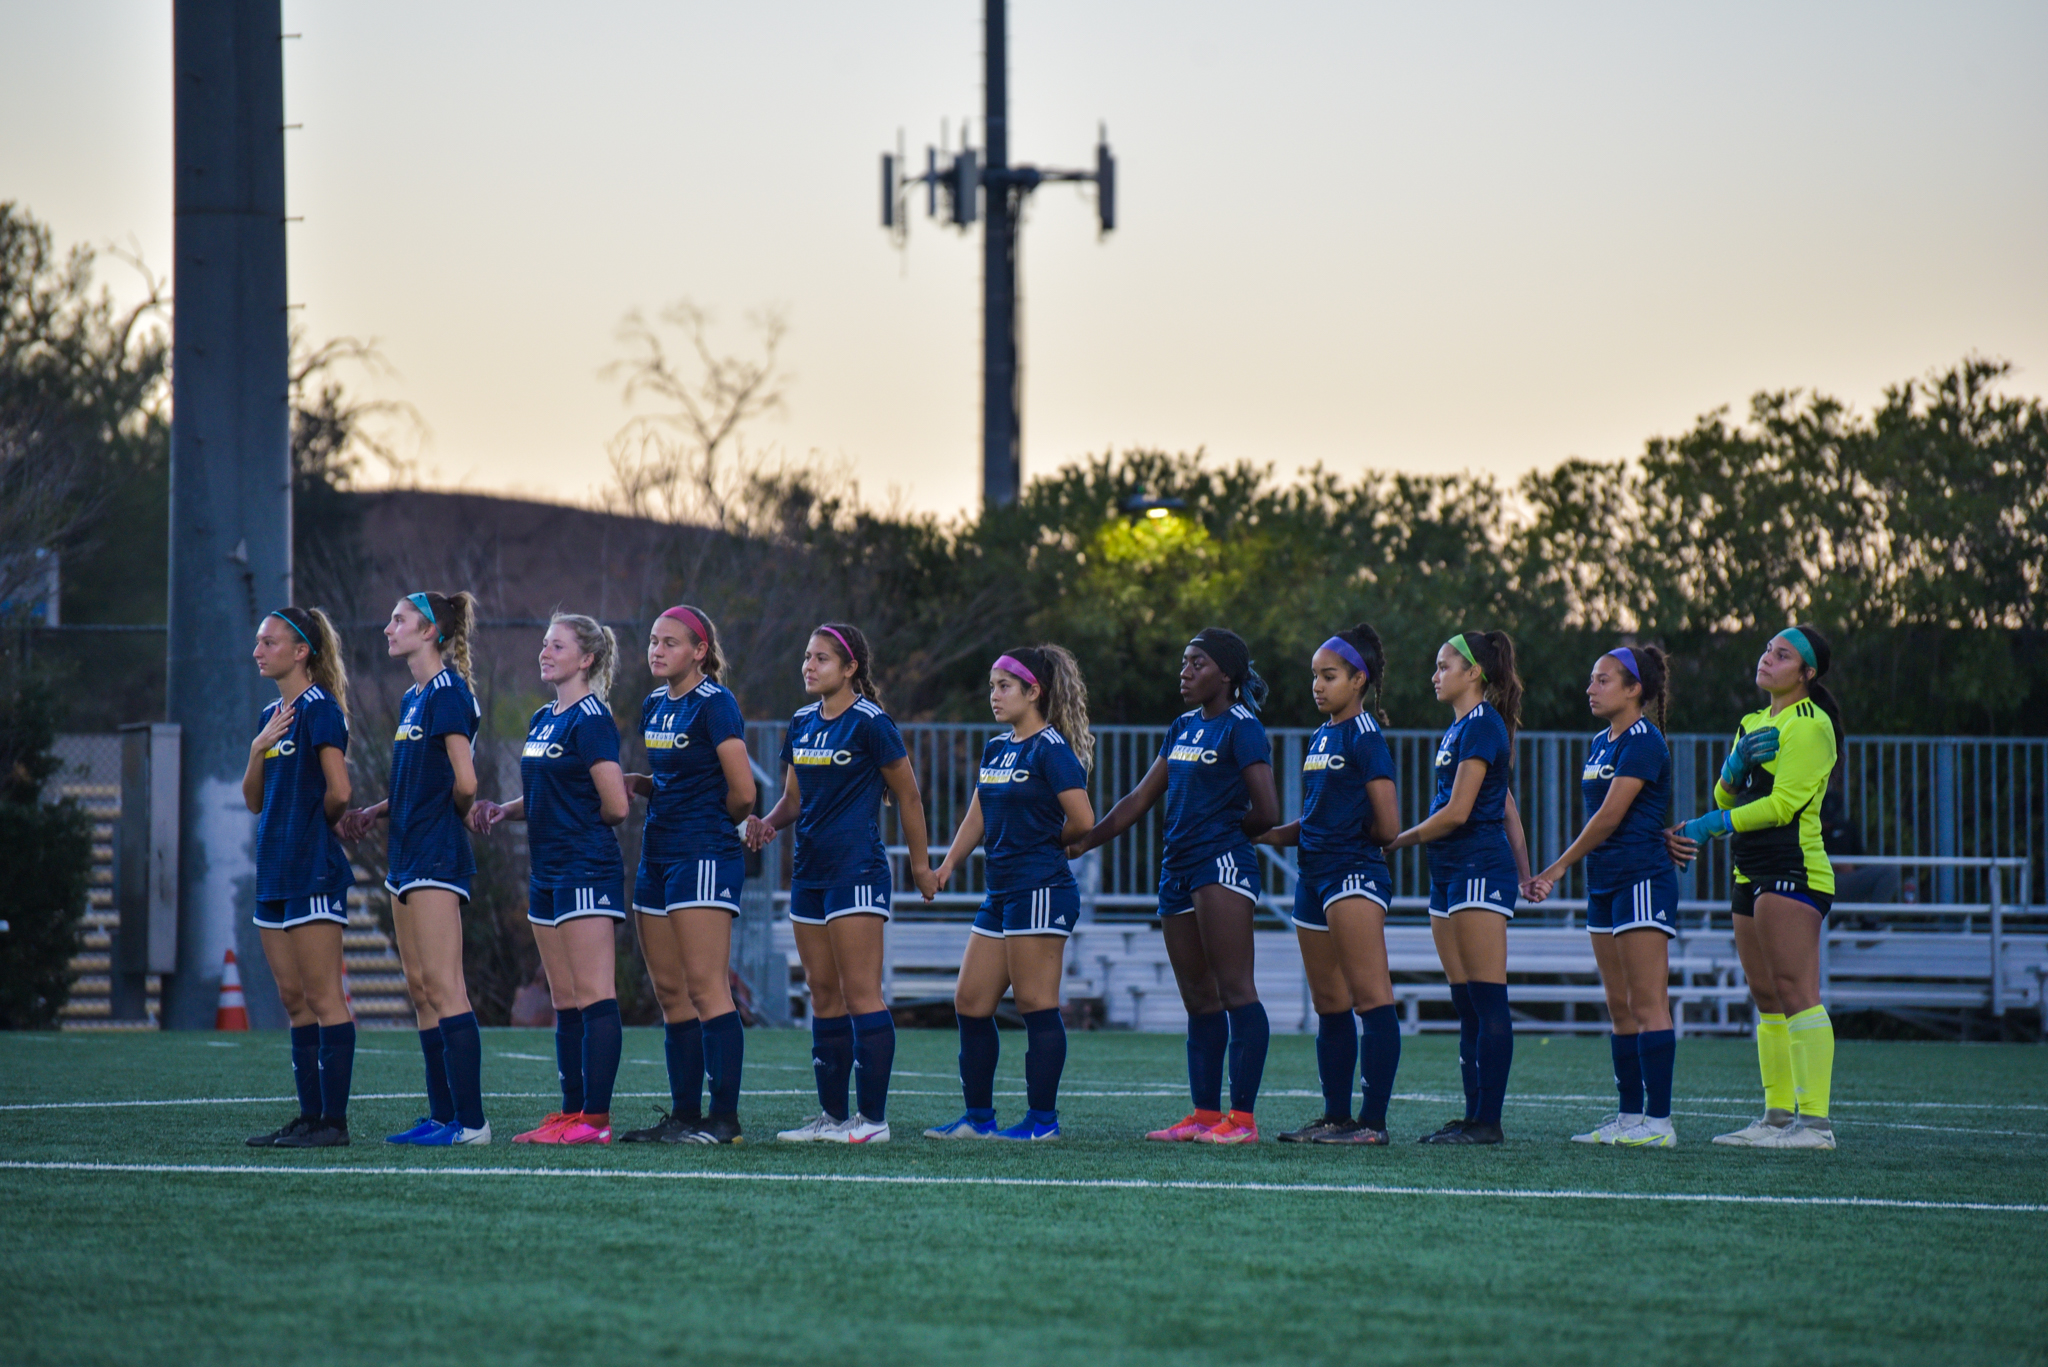 College of the Canyons will look to extend on the success of winning the program's 12th Western State Conference (WSC), South Division title, when the No.12 Cougars begin postseason play on the road vs. No. 5 San Diego Mesa College on Saturday, Nov. 20 — Mari Kneisel/COC Sports Information